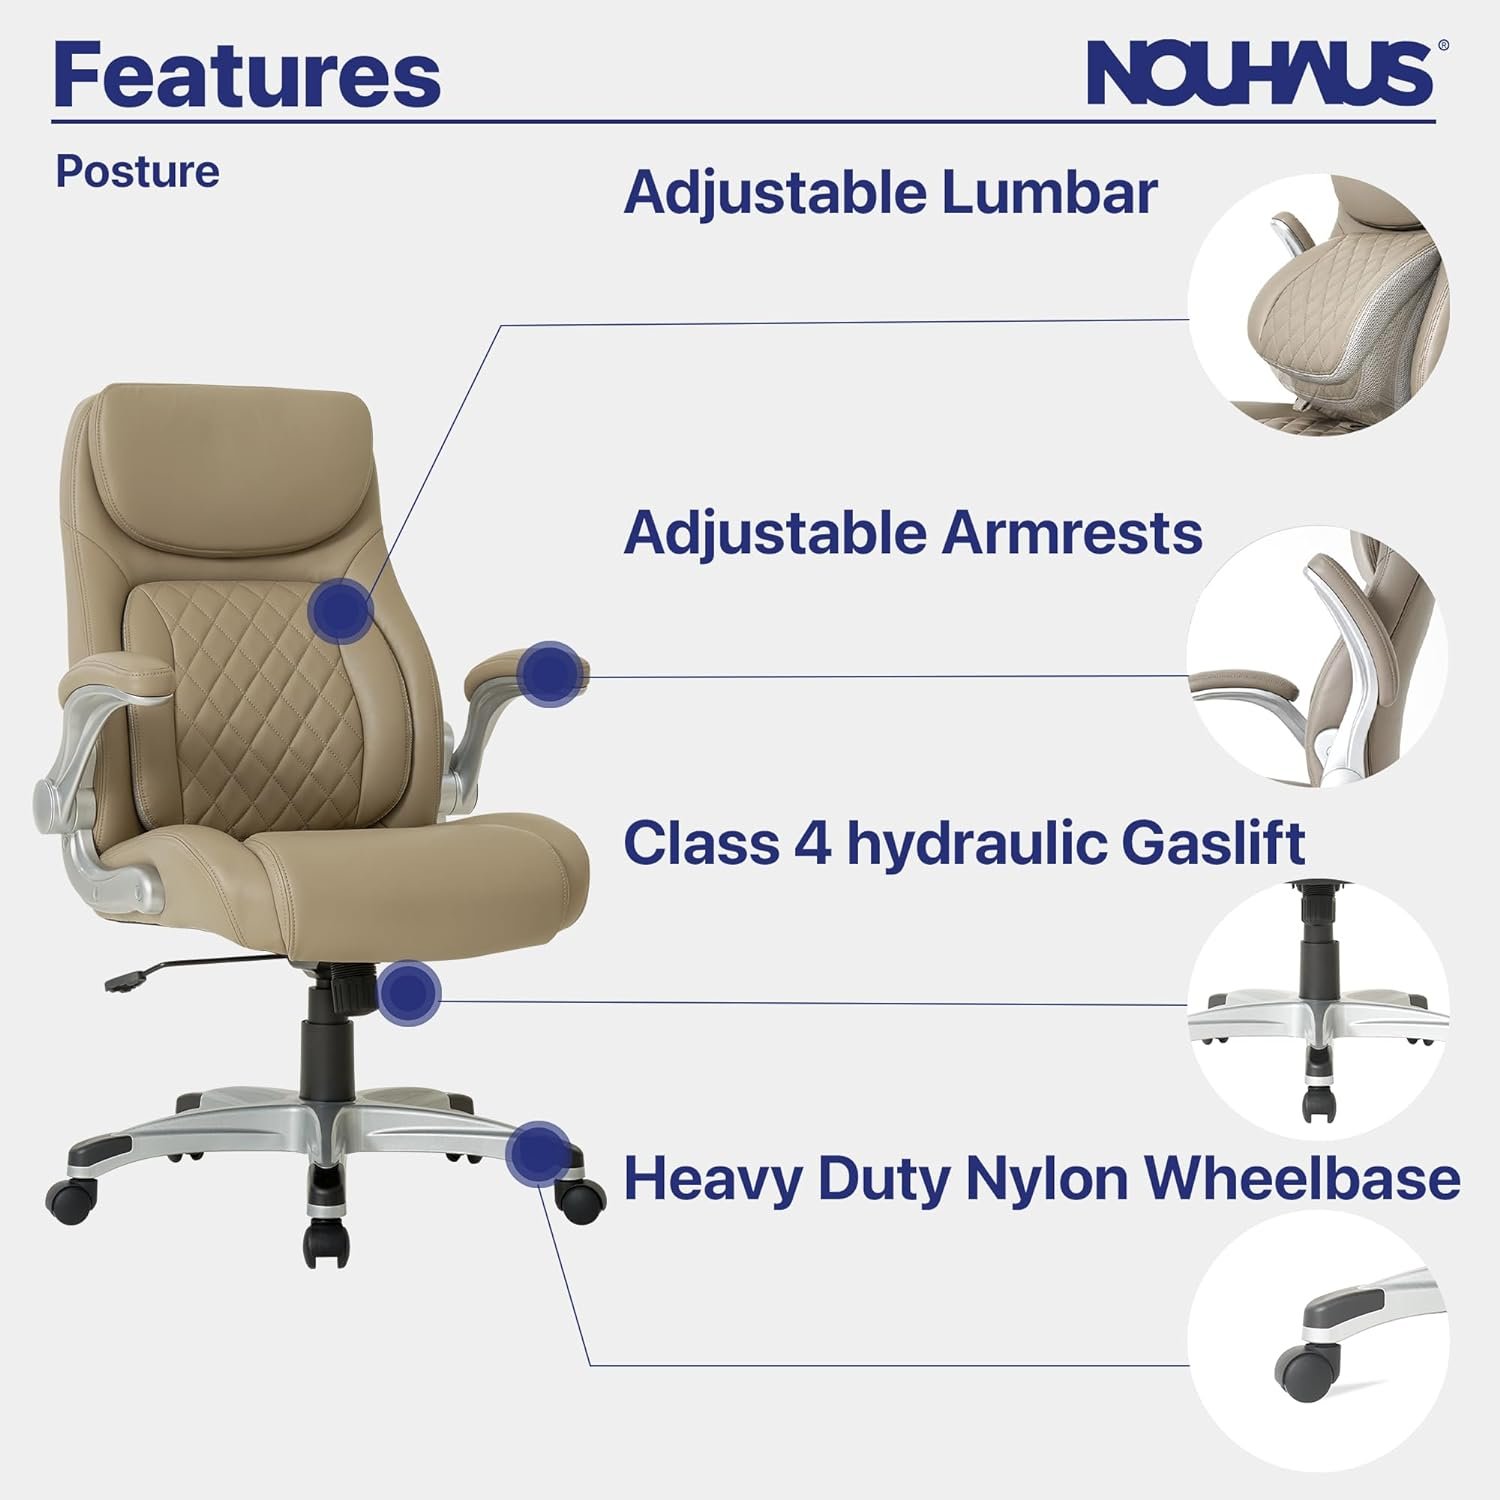 Nouhaus +Posture Ergonomic PU Leather Office Chair. Click5 Lumbar Support with FlipAdjust Armrests. Modern Executive Chair and Computer Desk Chair (White)